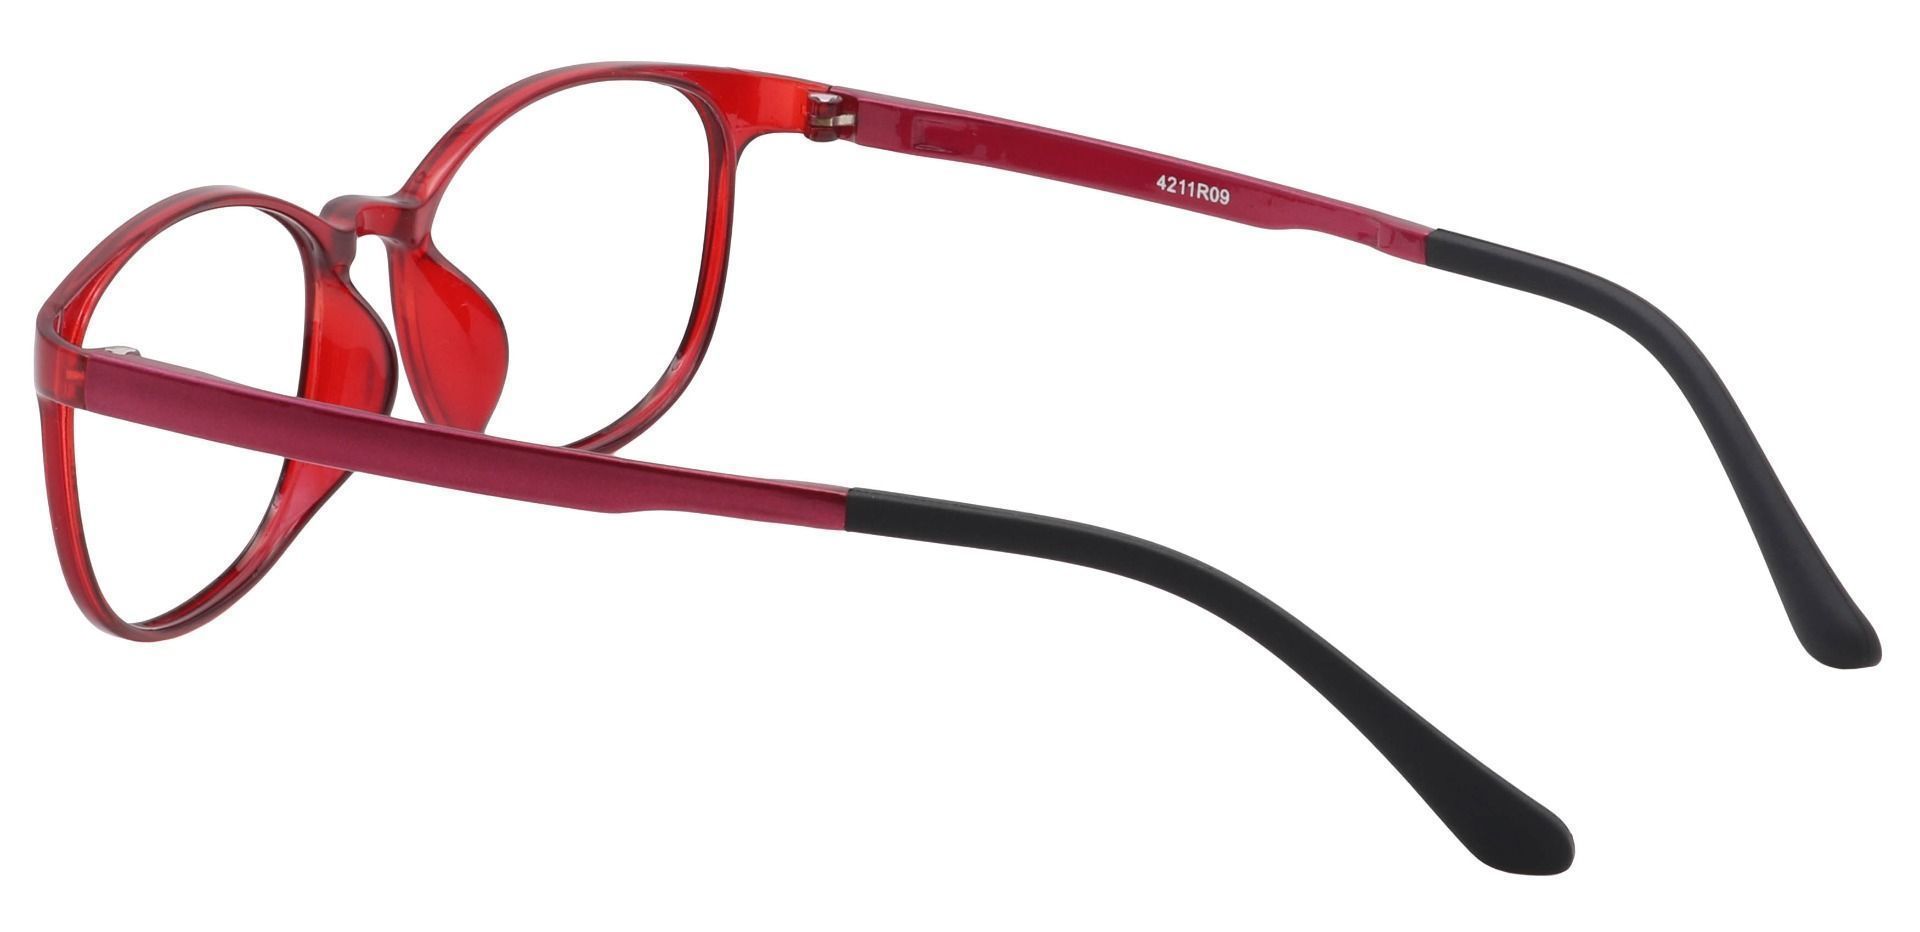 Sherry Oval Prescription Glasses - Red Crystal